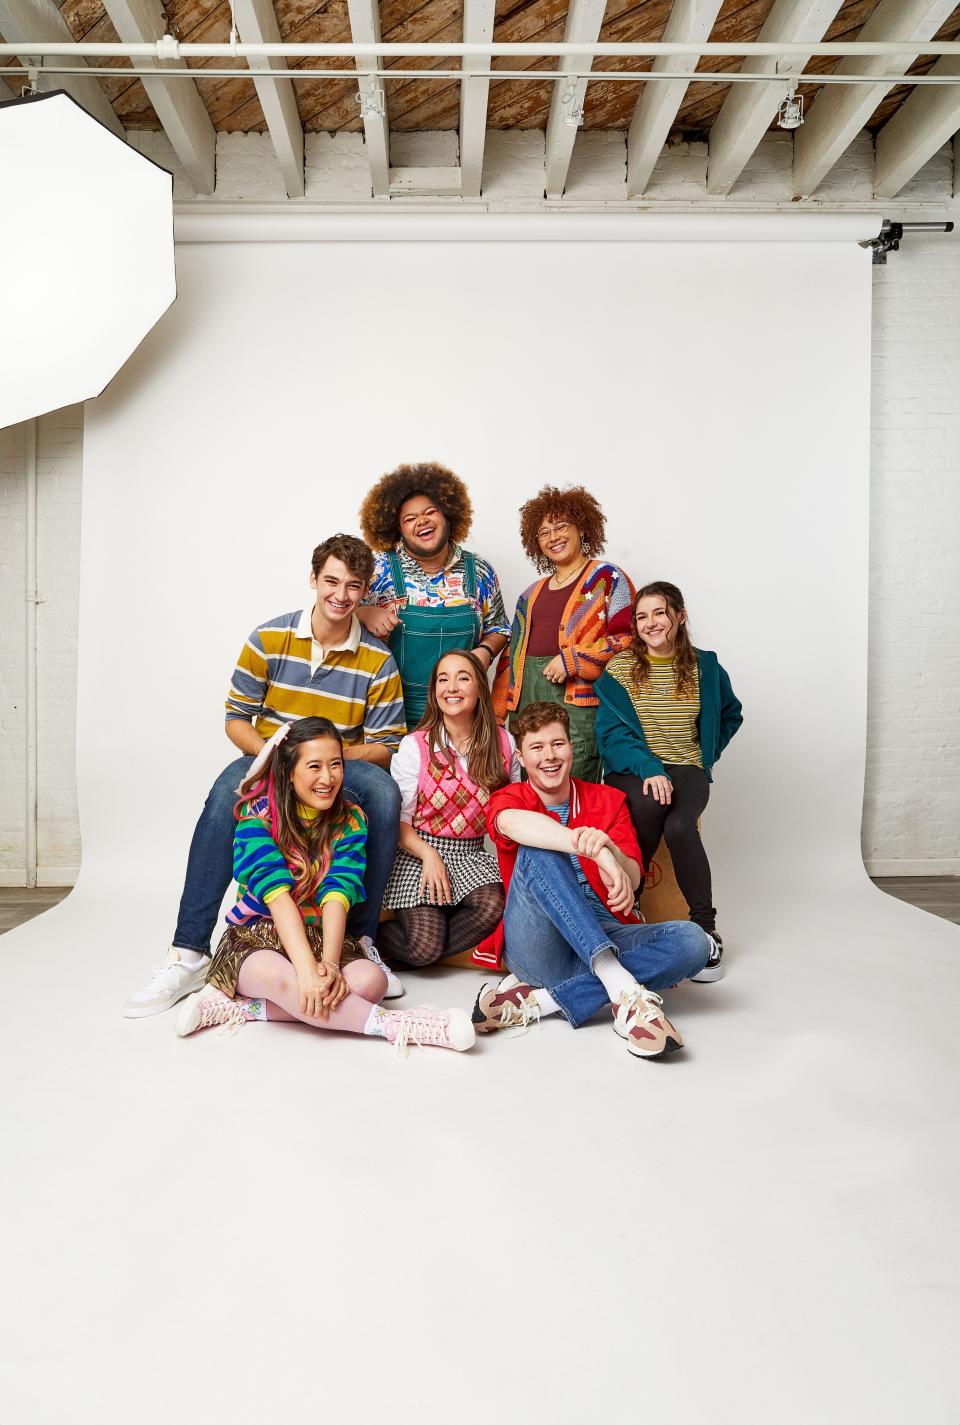 The final "How to Dance in Ohio" ensemble consists of (top row, from left) Liam Pearce, Desmond Edwards, Imani Russel, Madison Kopec and (bottom row, from left) Amelia Fei, Ashley Wool and Conor Tague.